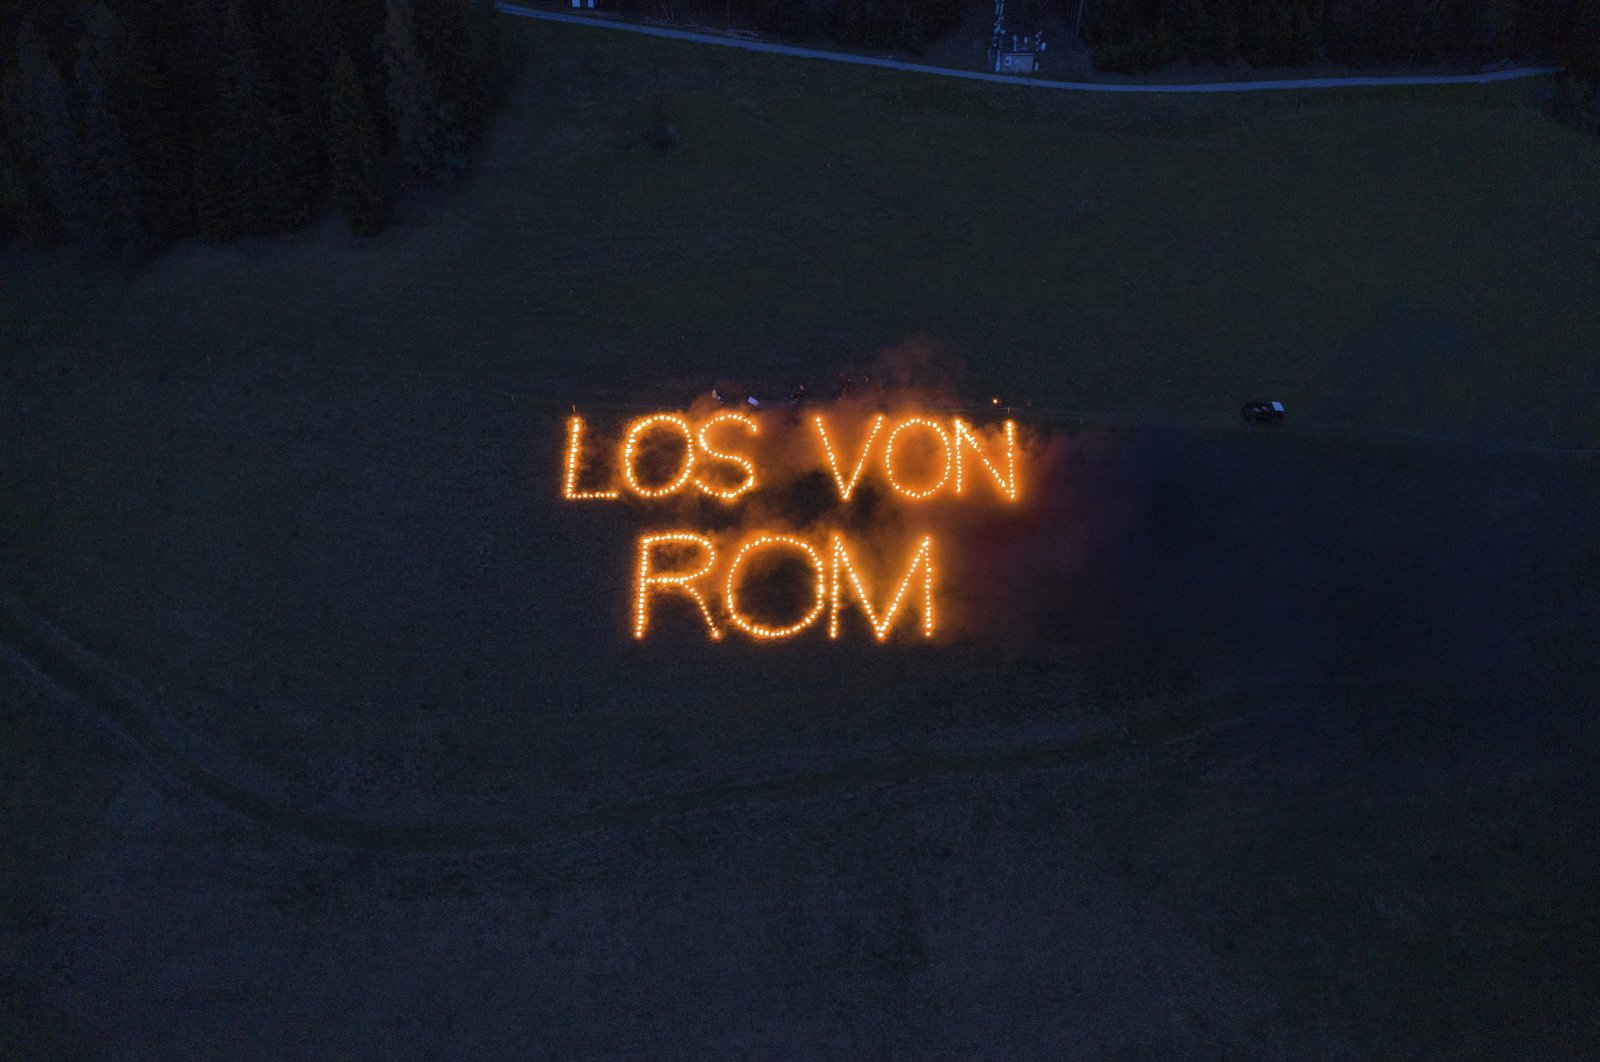 Writing with fire reading in German "Away from Rome", on a field in Val Pusteria, known in German as Pusteral, in the German-speaking province of South Tyrol, Italy, May 2, 2020. (Südtiroler Schützenbund via AP)